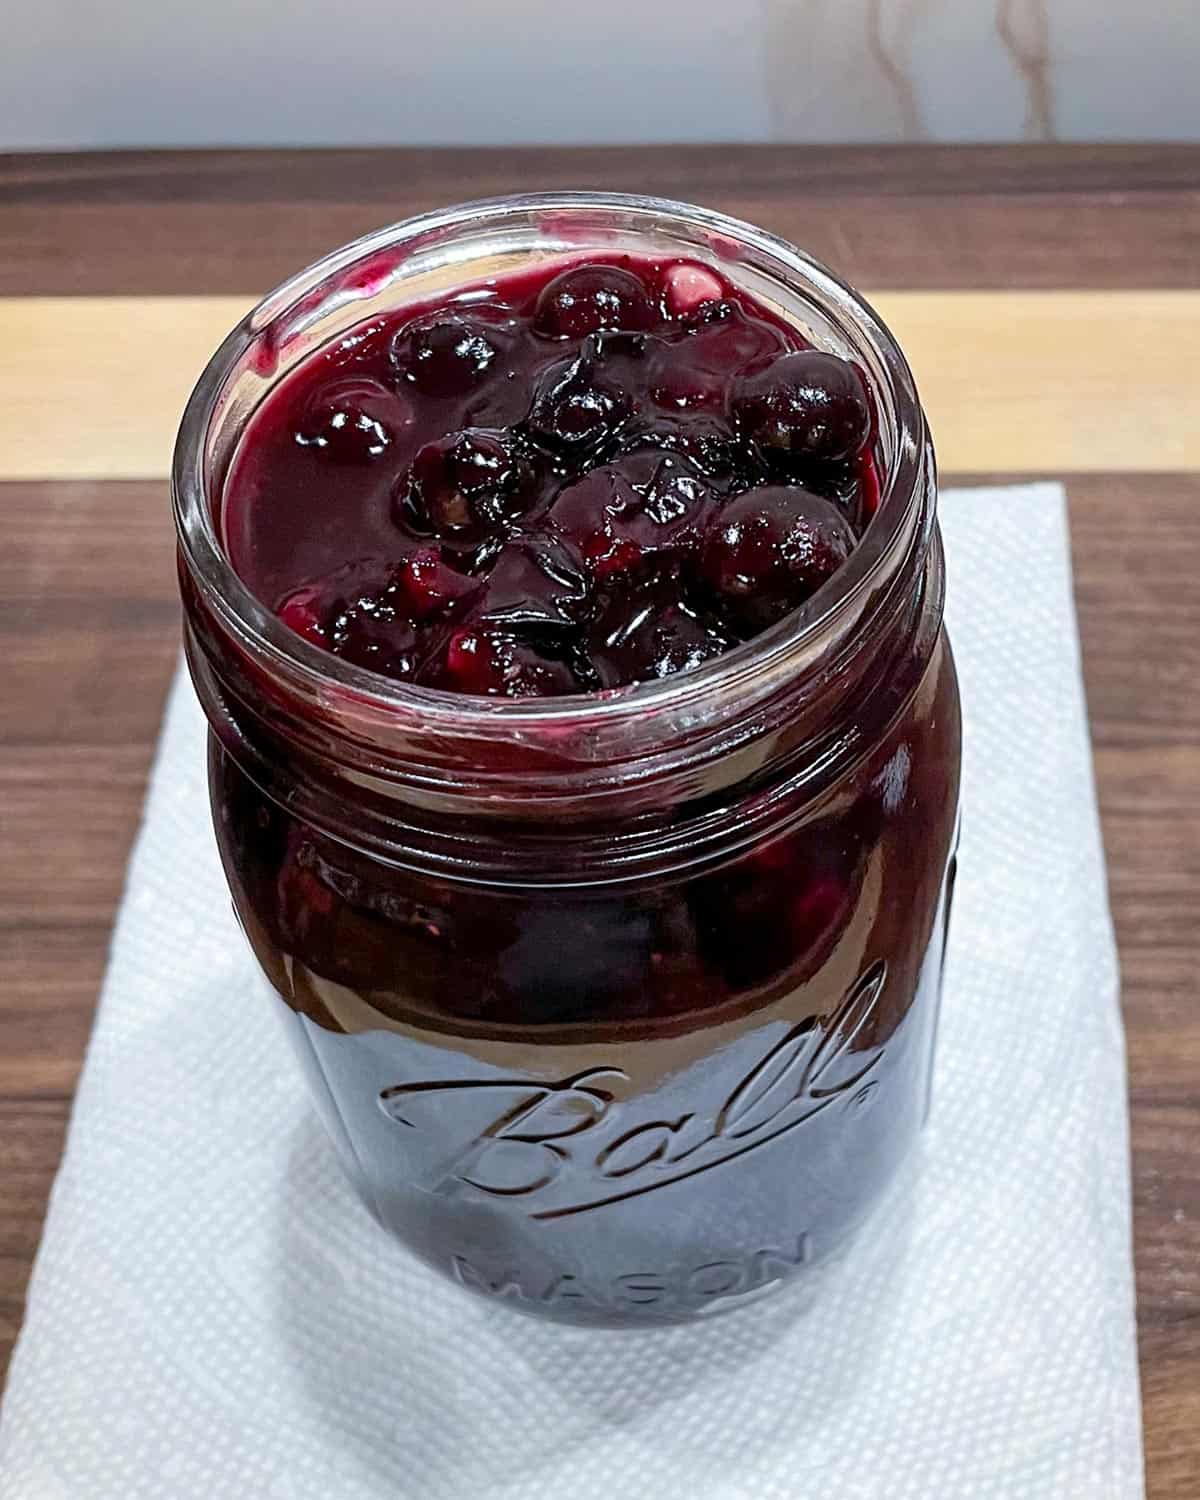 Blueberry topping for cheesecake in a glass jar.